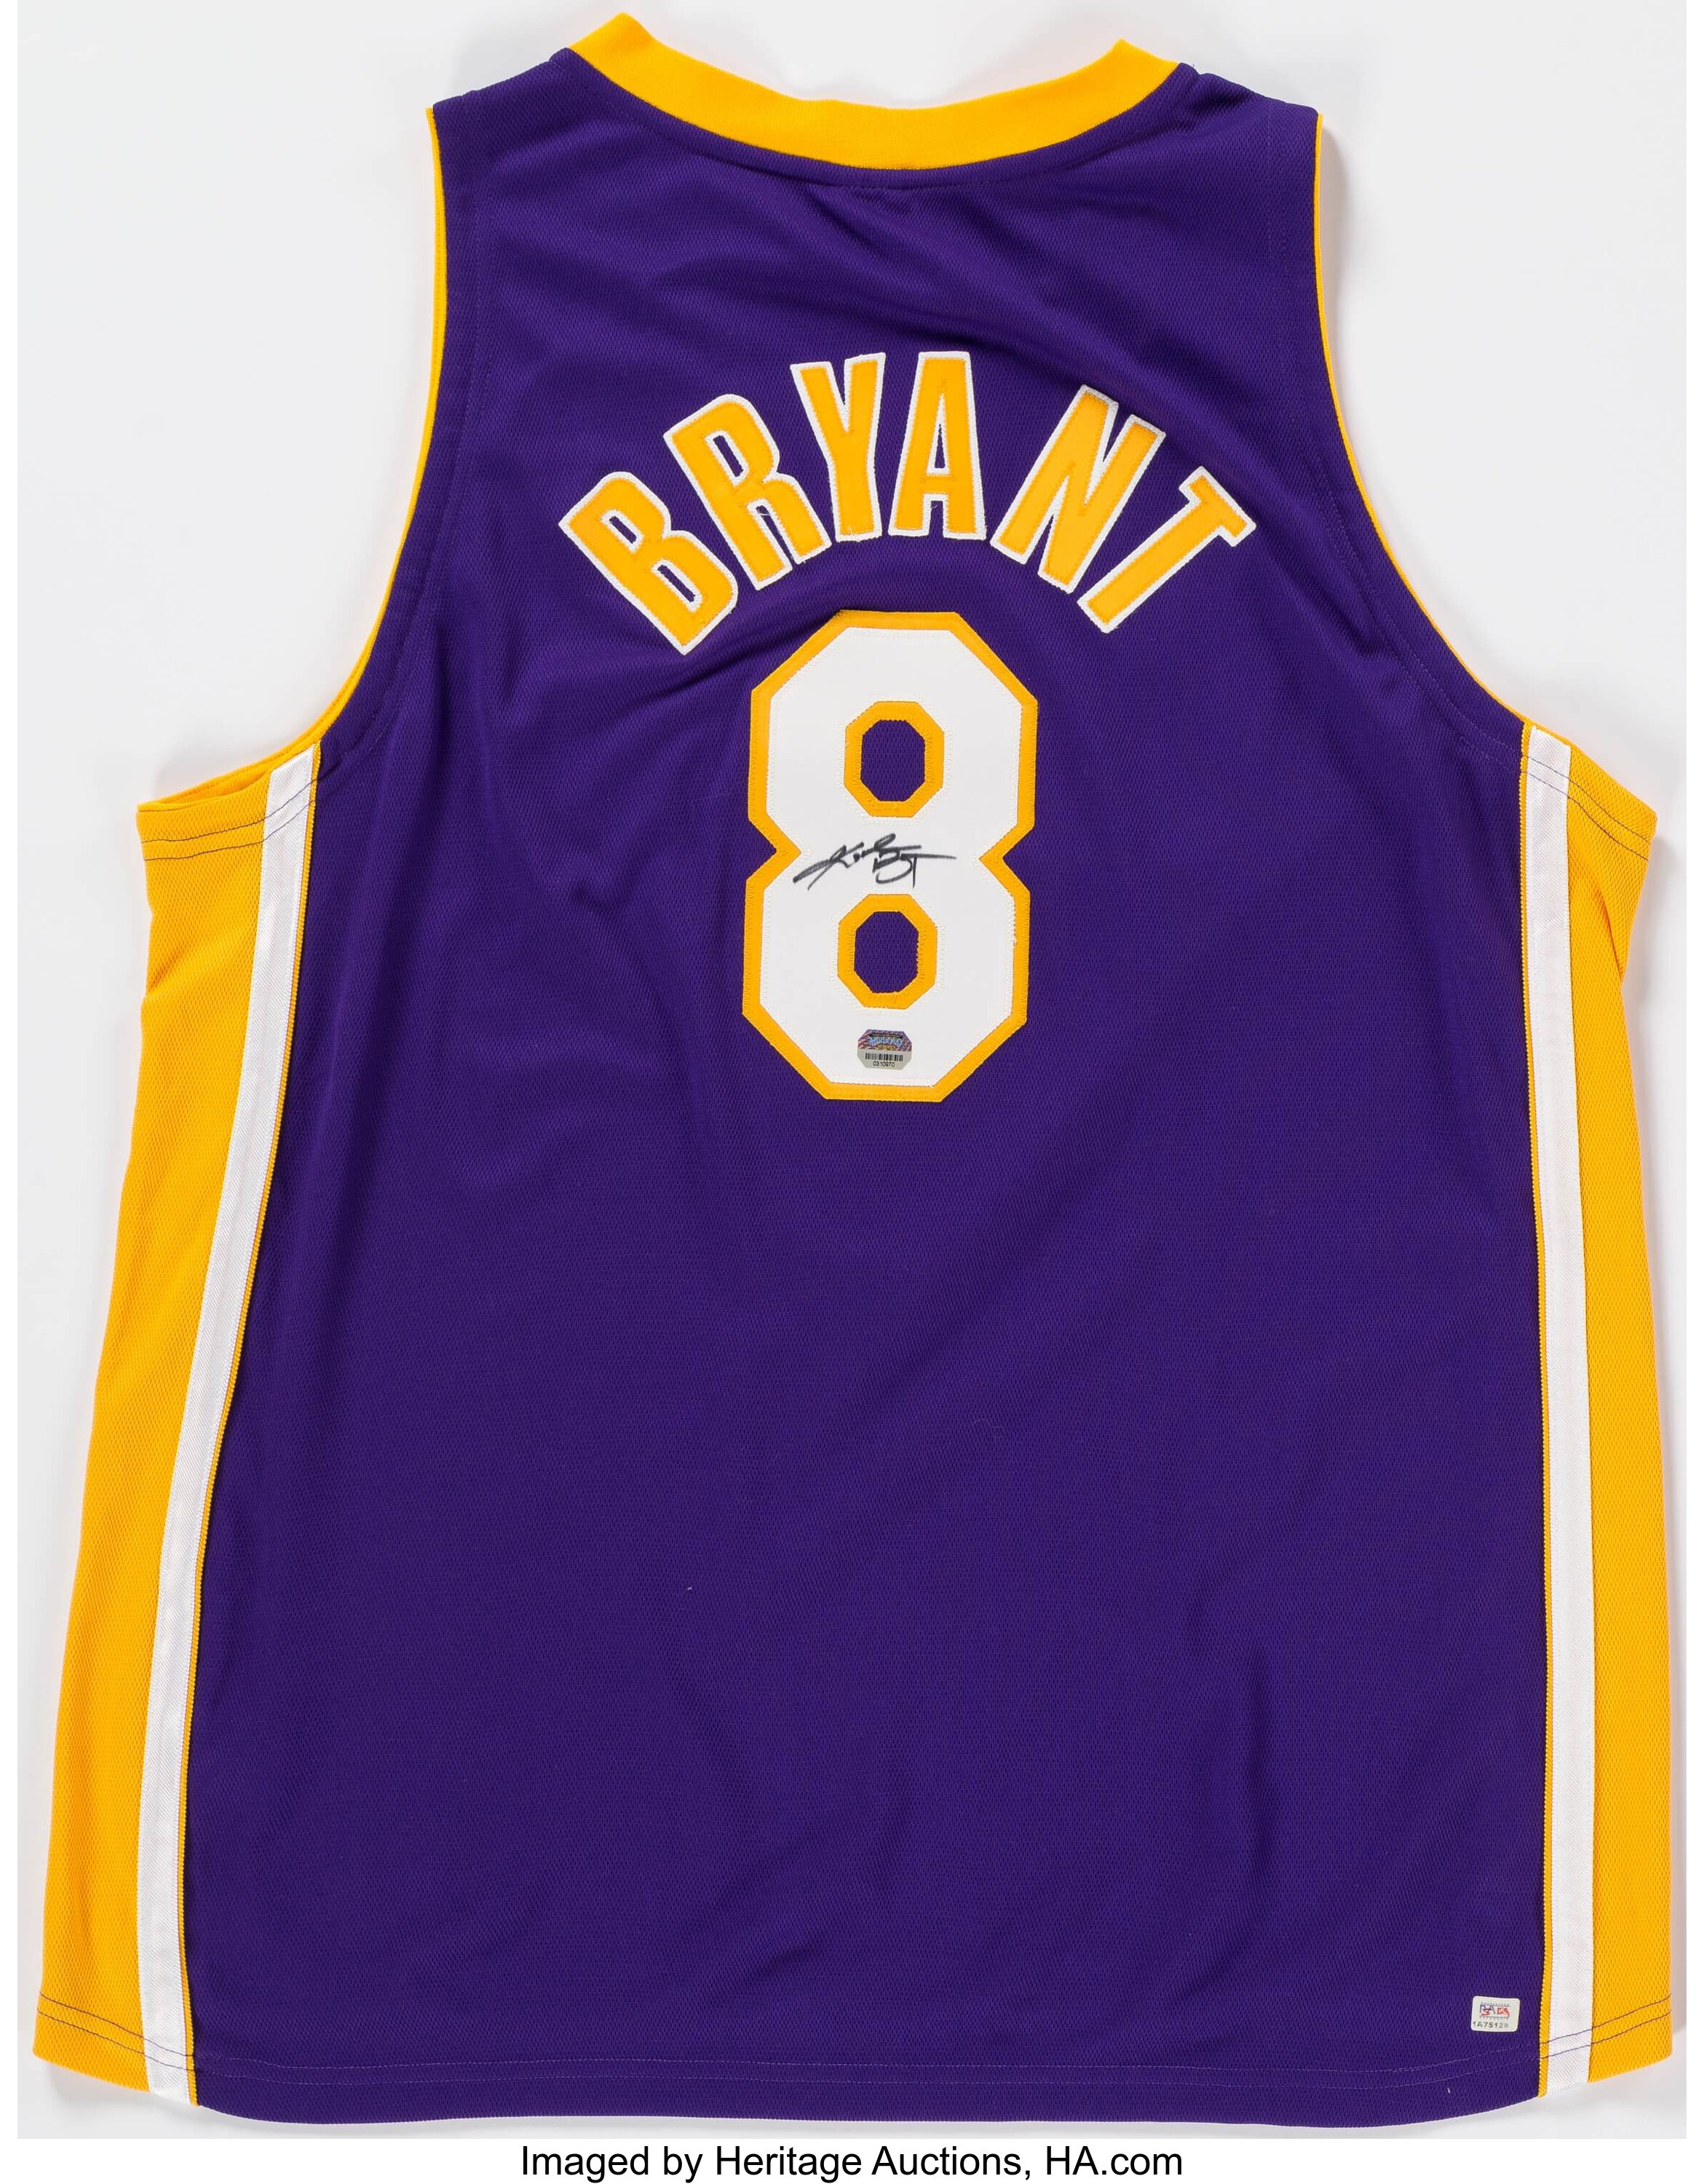 Kobe Bryant Signed Los Angeles Lakers Jersey. Basketball, Lot #42161